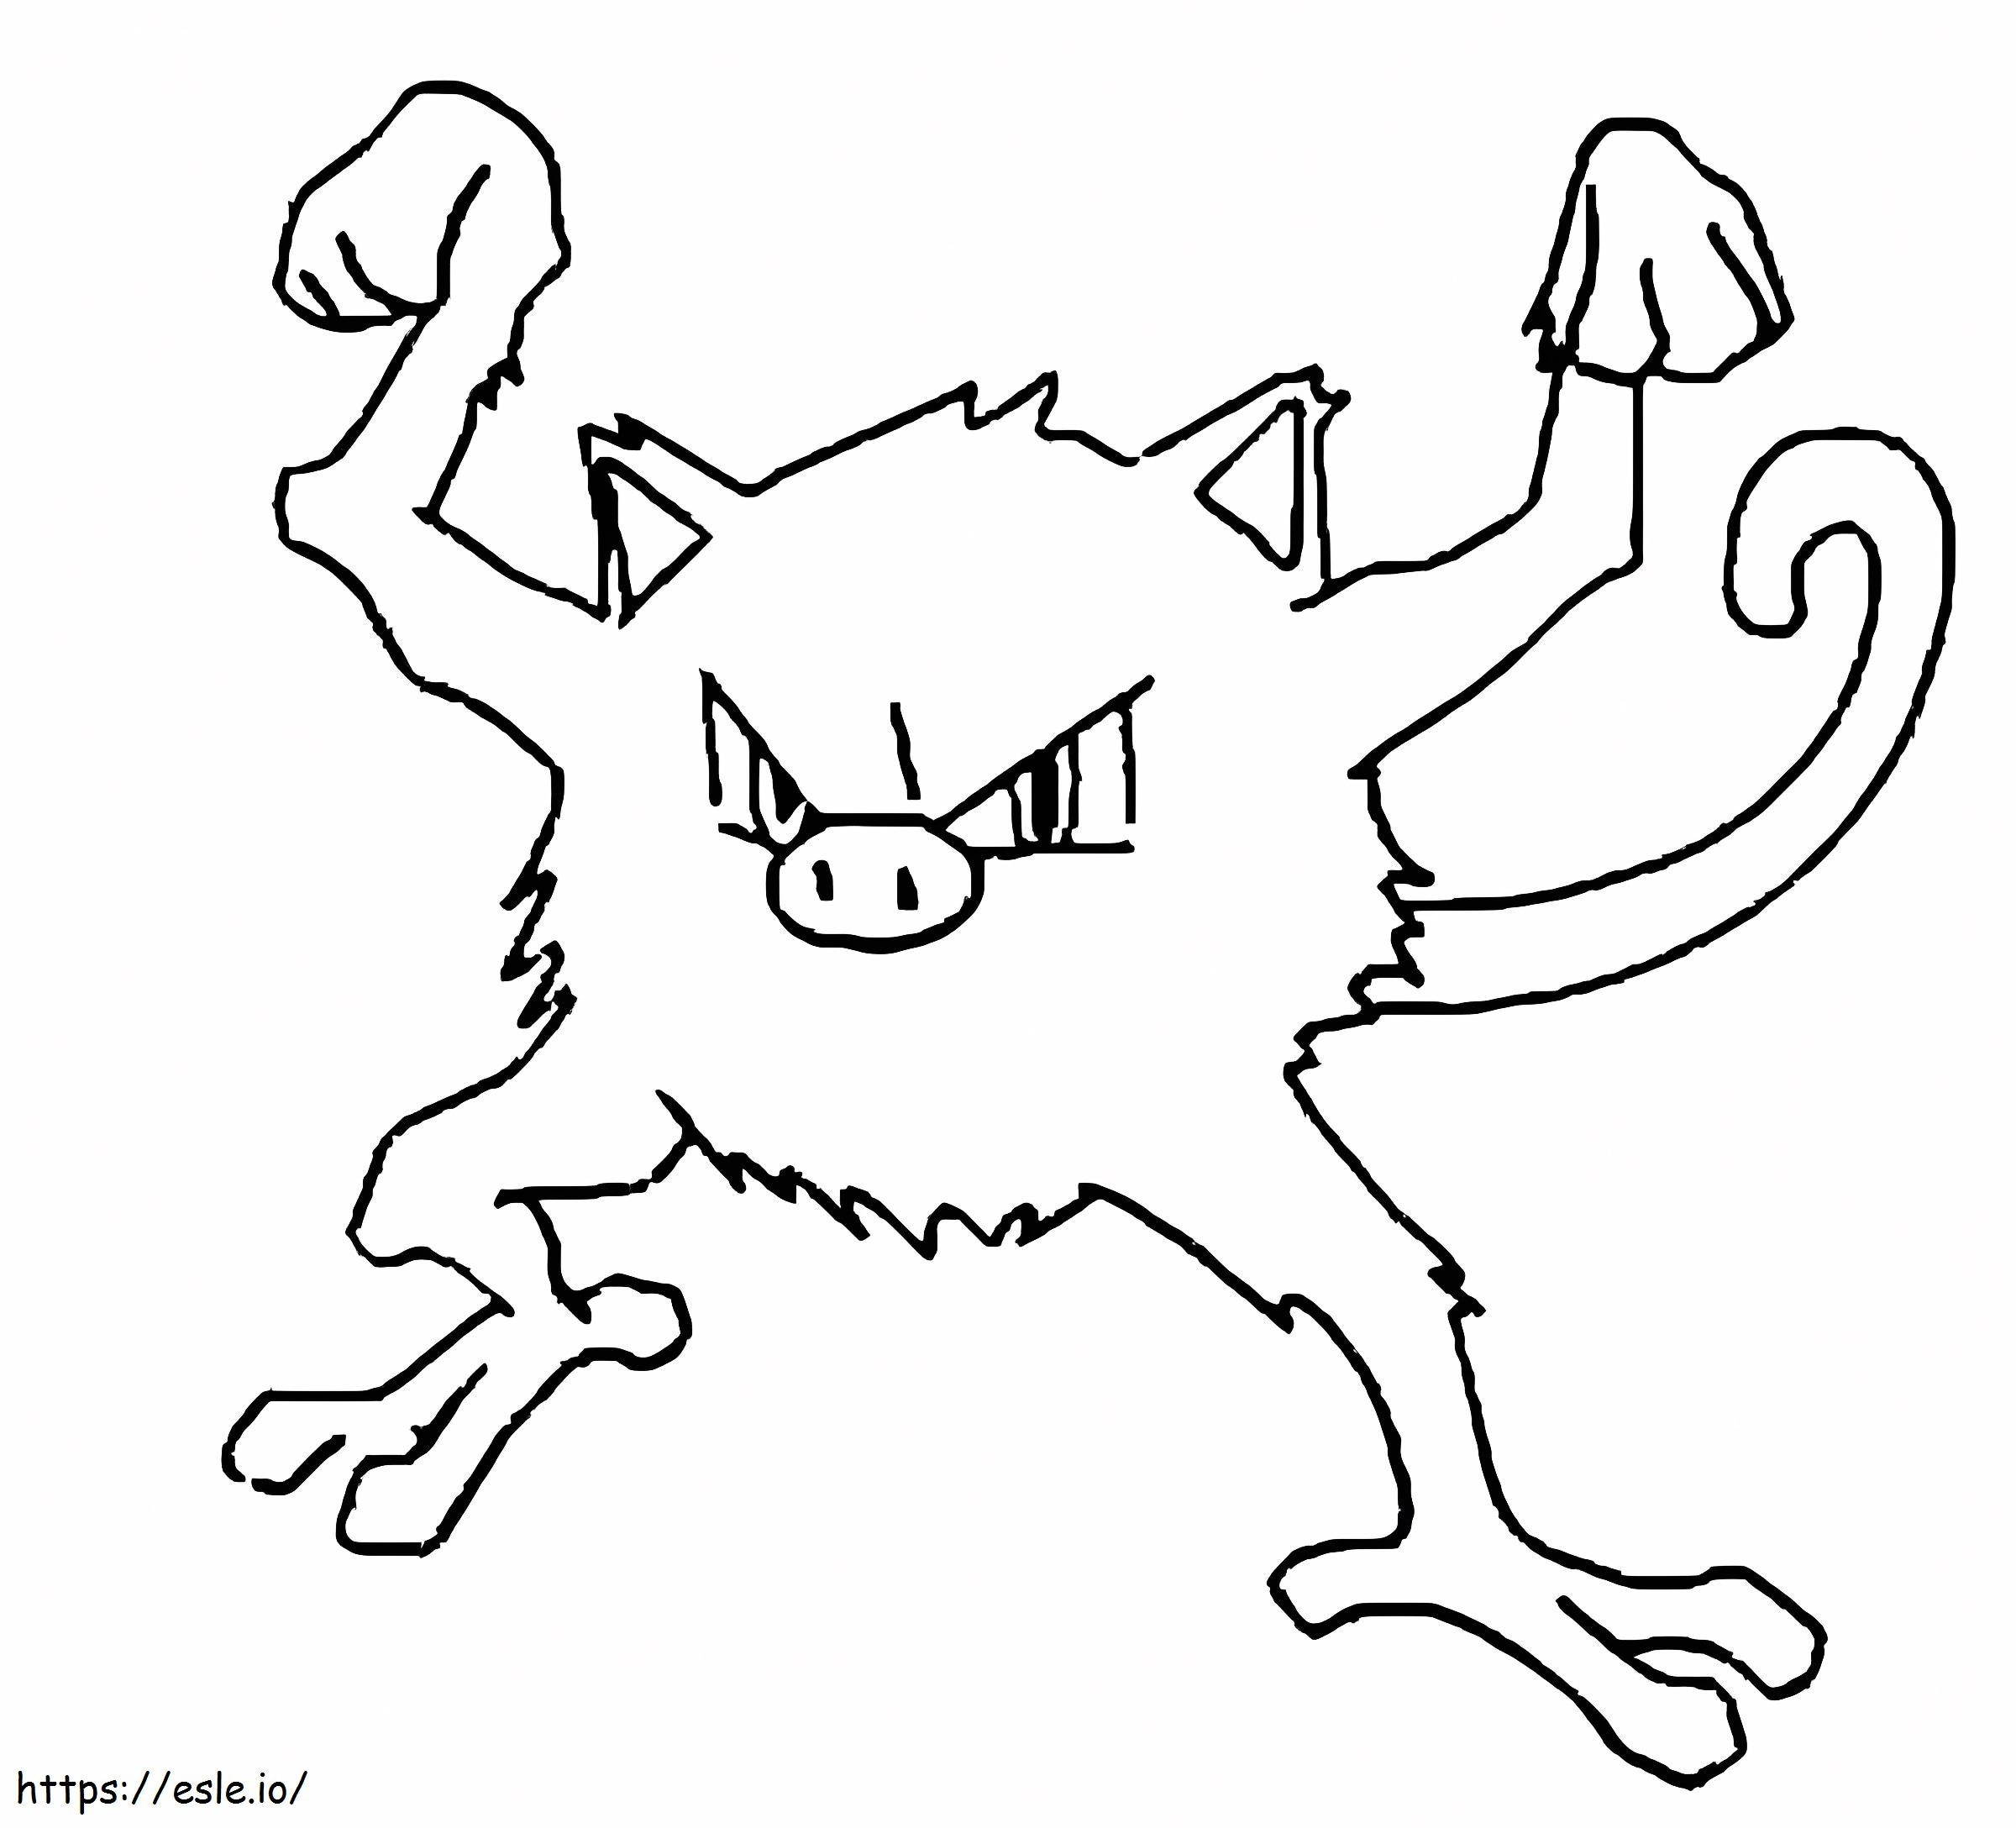 Mankey 1 coloring page